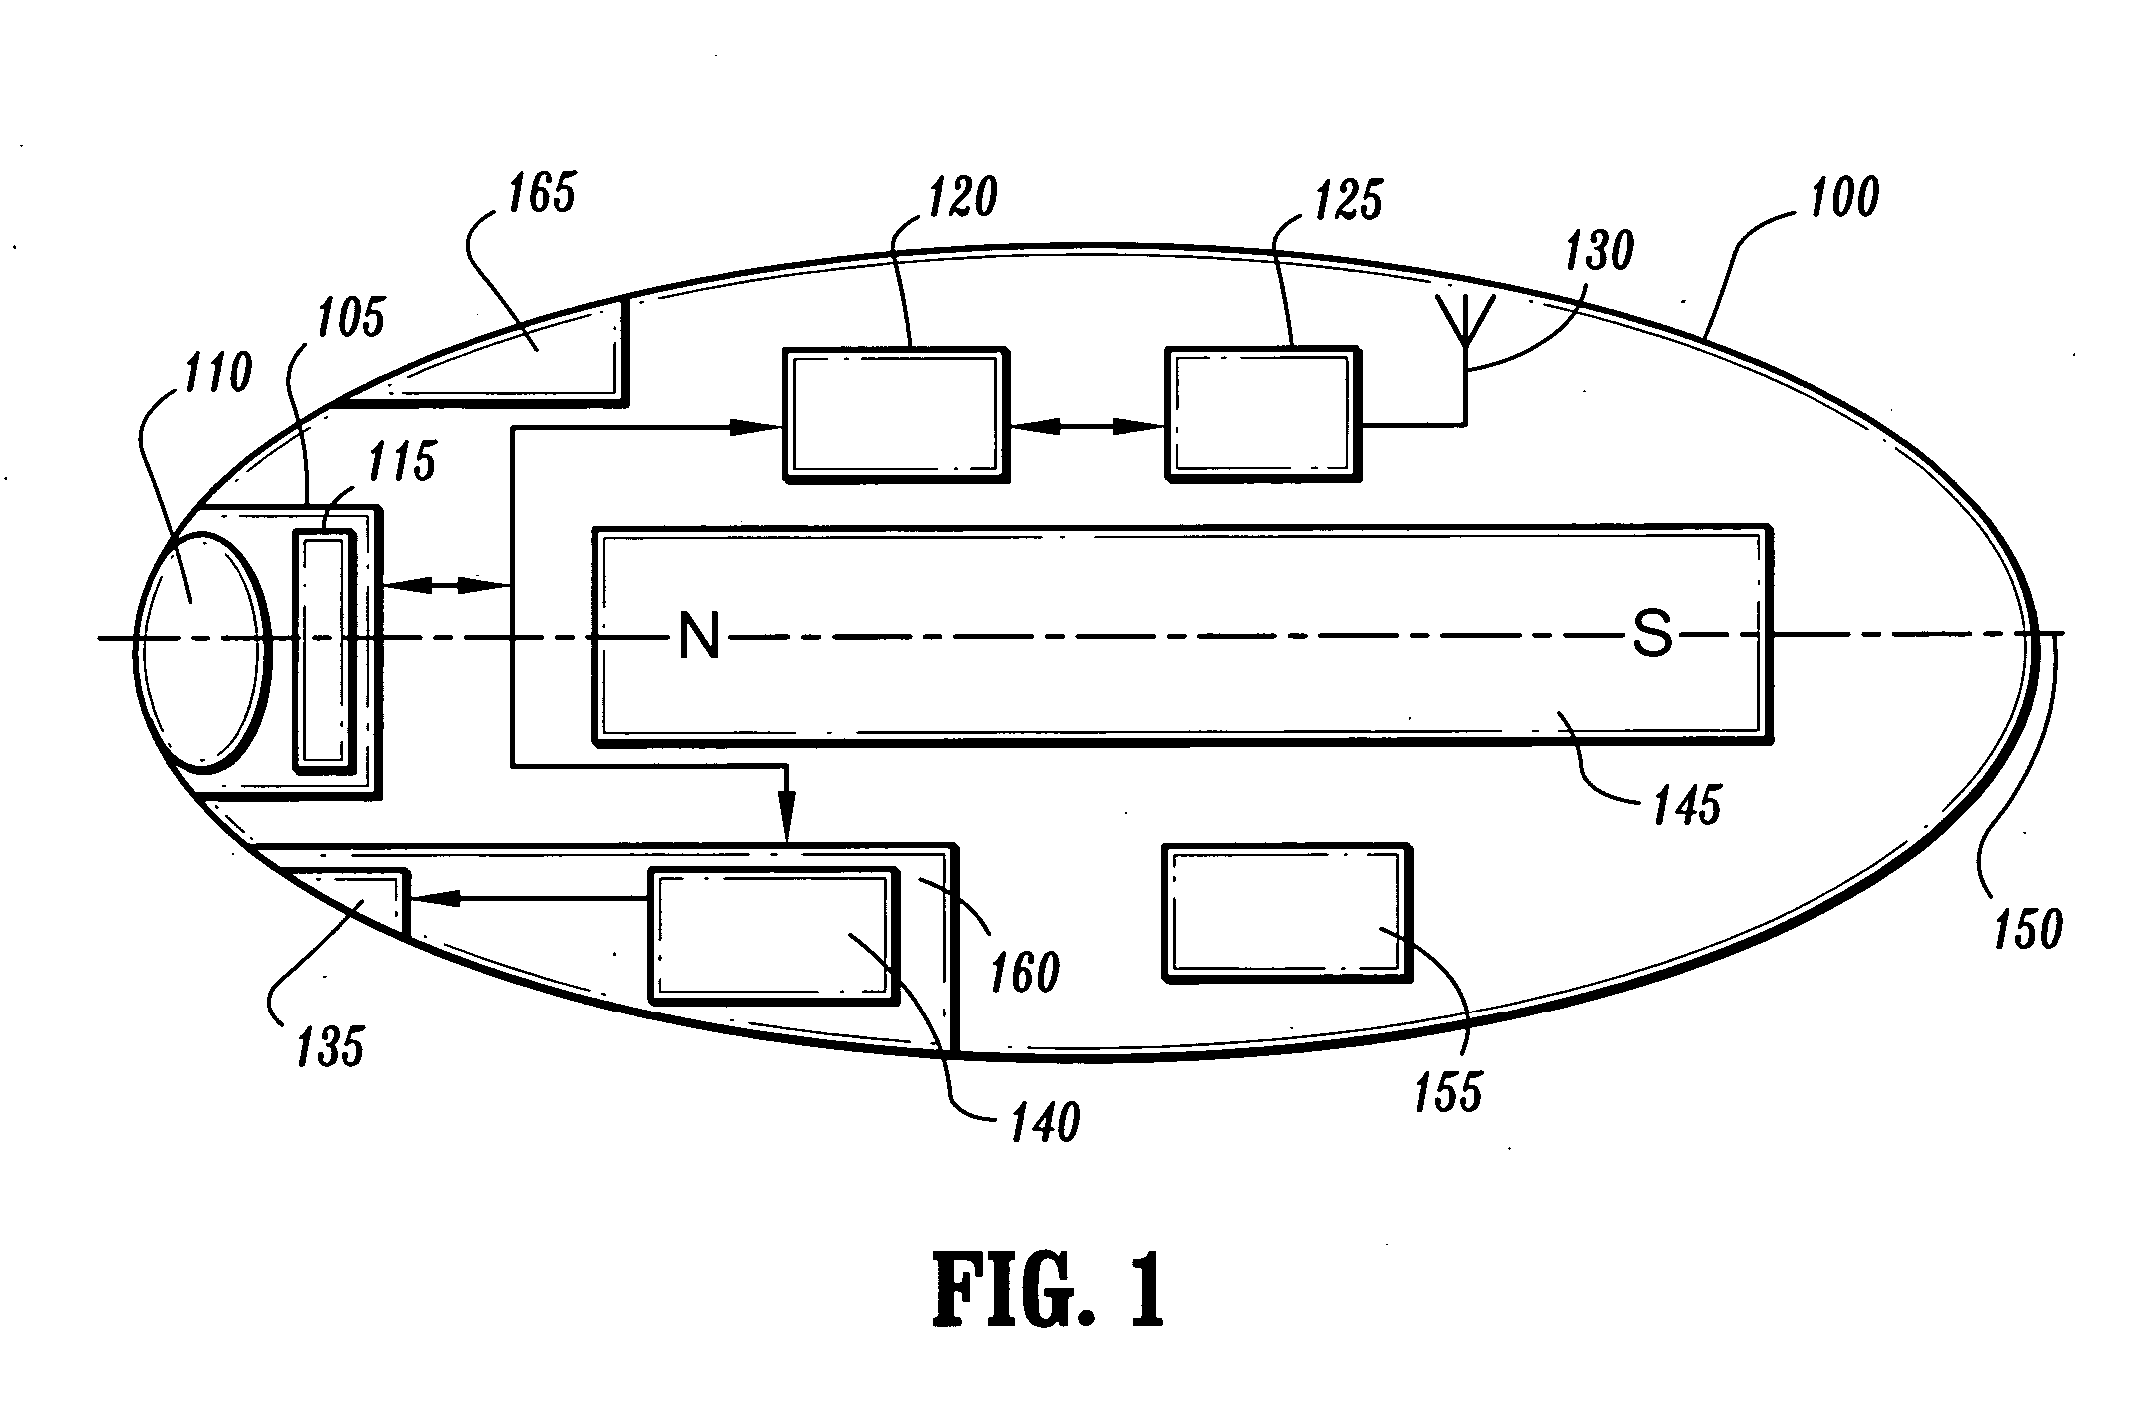 System and method for endoscopic optical constrast imaging using an endo-robot